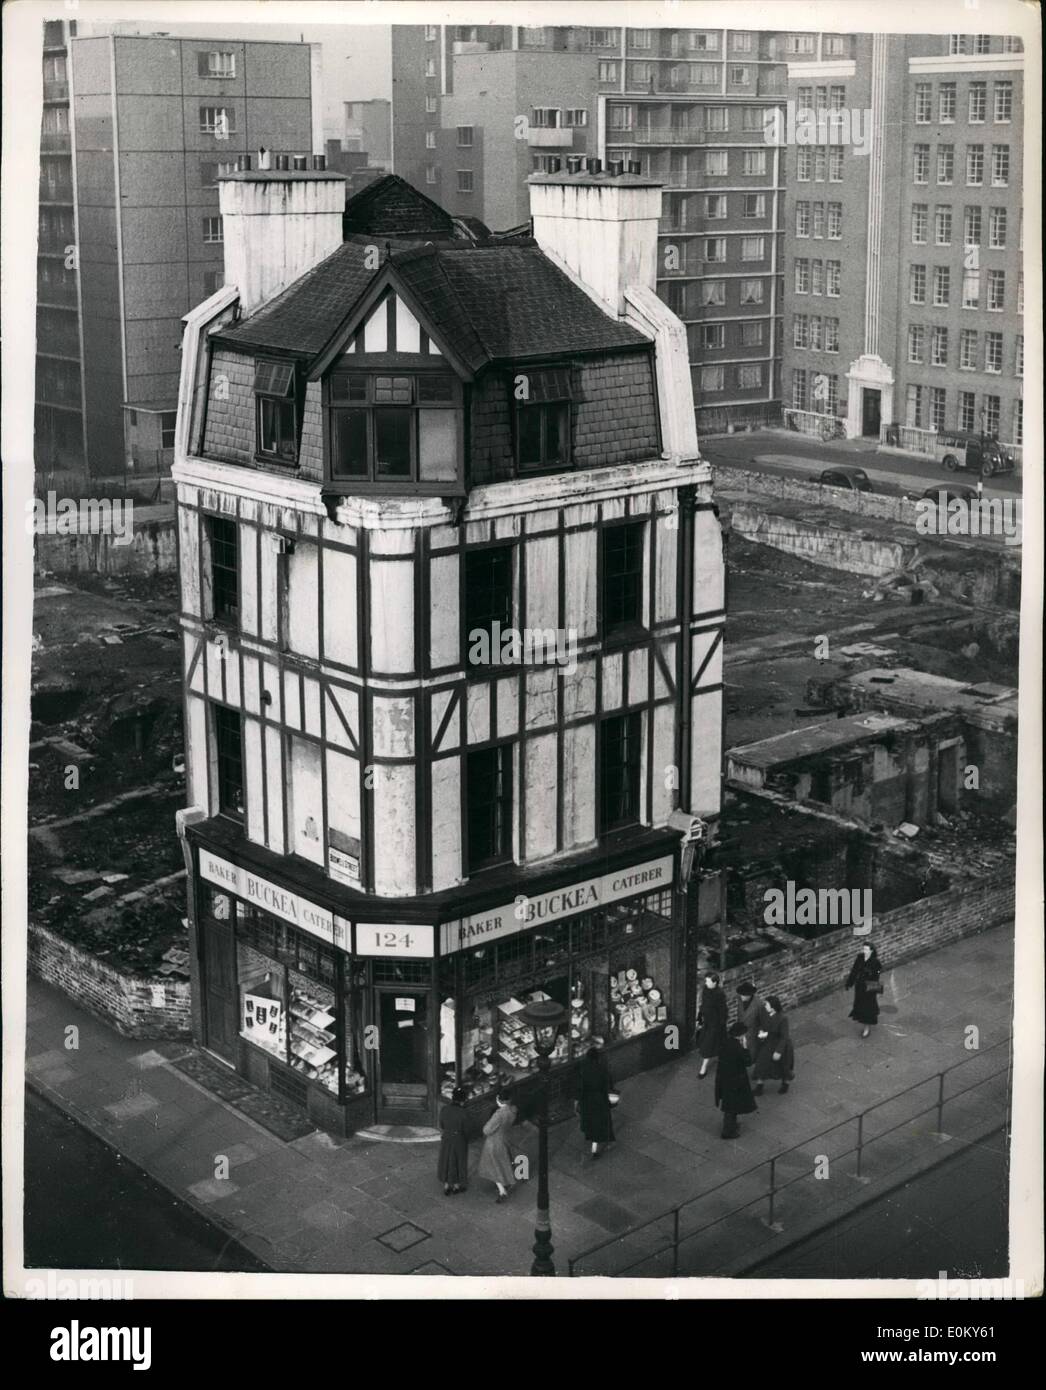 Nov. 11, 1952 - It Stands Alone Ancient and Modern in London: A little bit of old London survives on the blitz site at the corner of Boswell Street and theobalds Road, Holborn. It contrasts with the modern block of council flats and civil Aviation offices in the background. Stock Photo